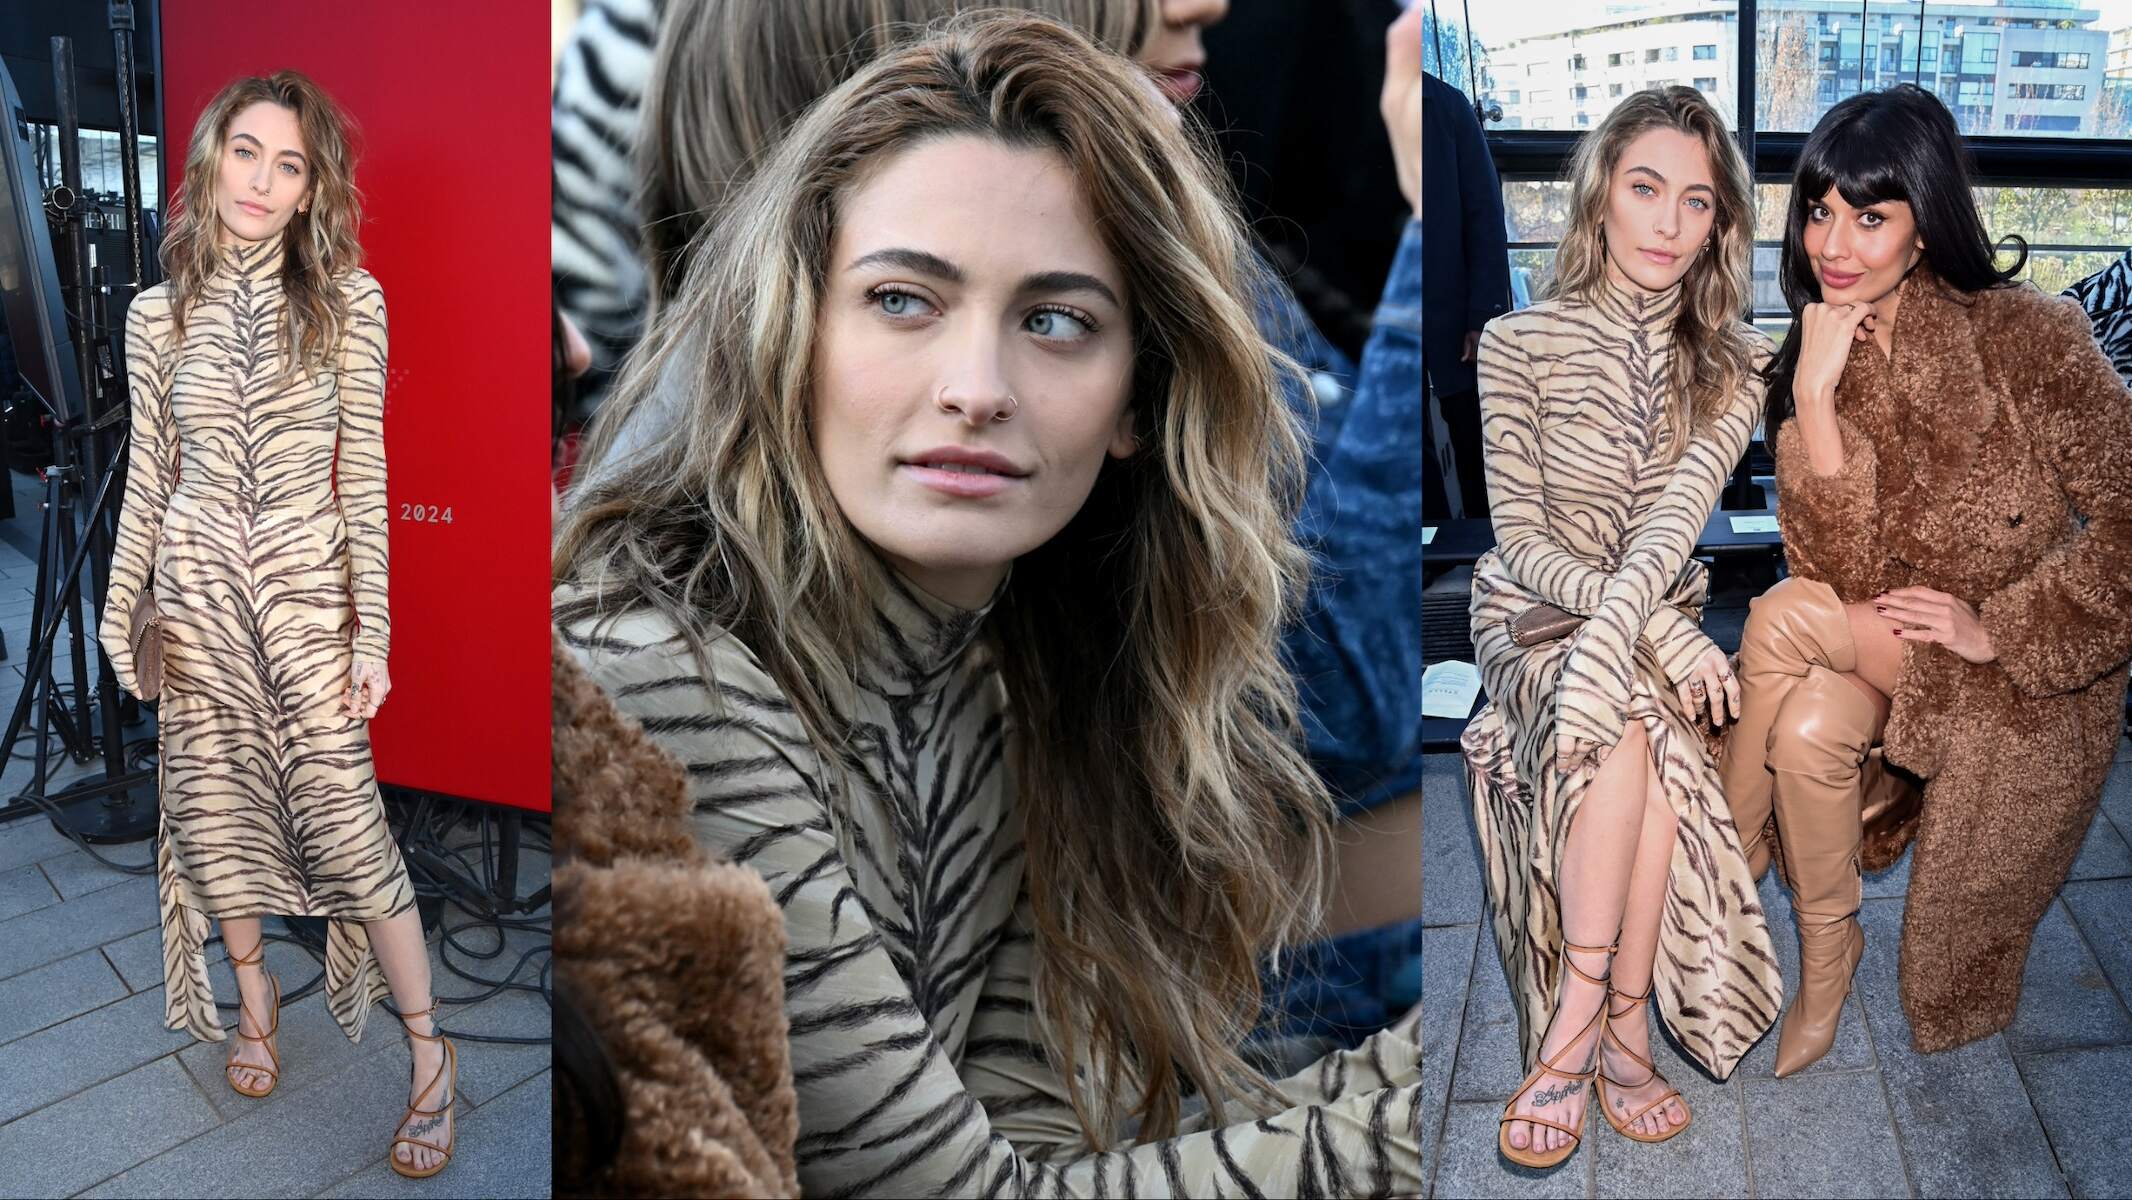 Celebs Paris Jackson and Jameela Jamil sit together front row at the Stella McCartney Winter 2024 show during Paris Fashion Week